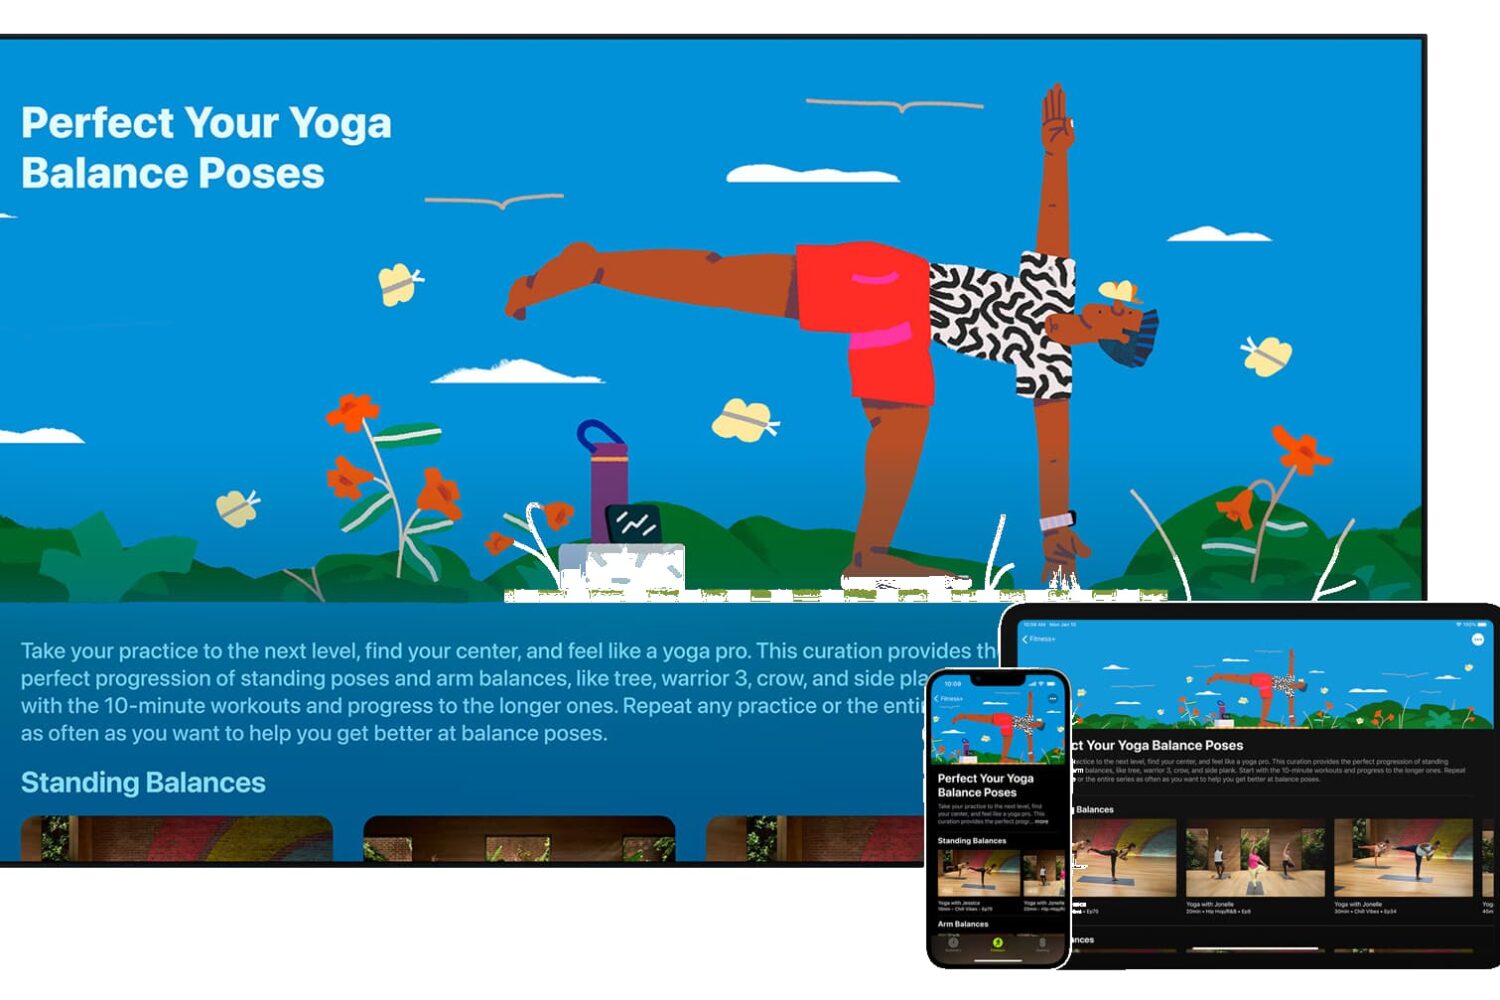 Promotional image showing curated yoga collections on Apple Fitness+ on iPhone, iPad and Apple Watch